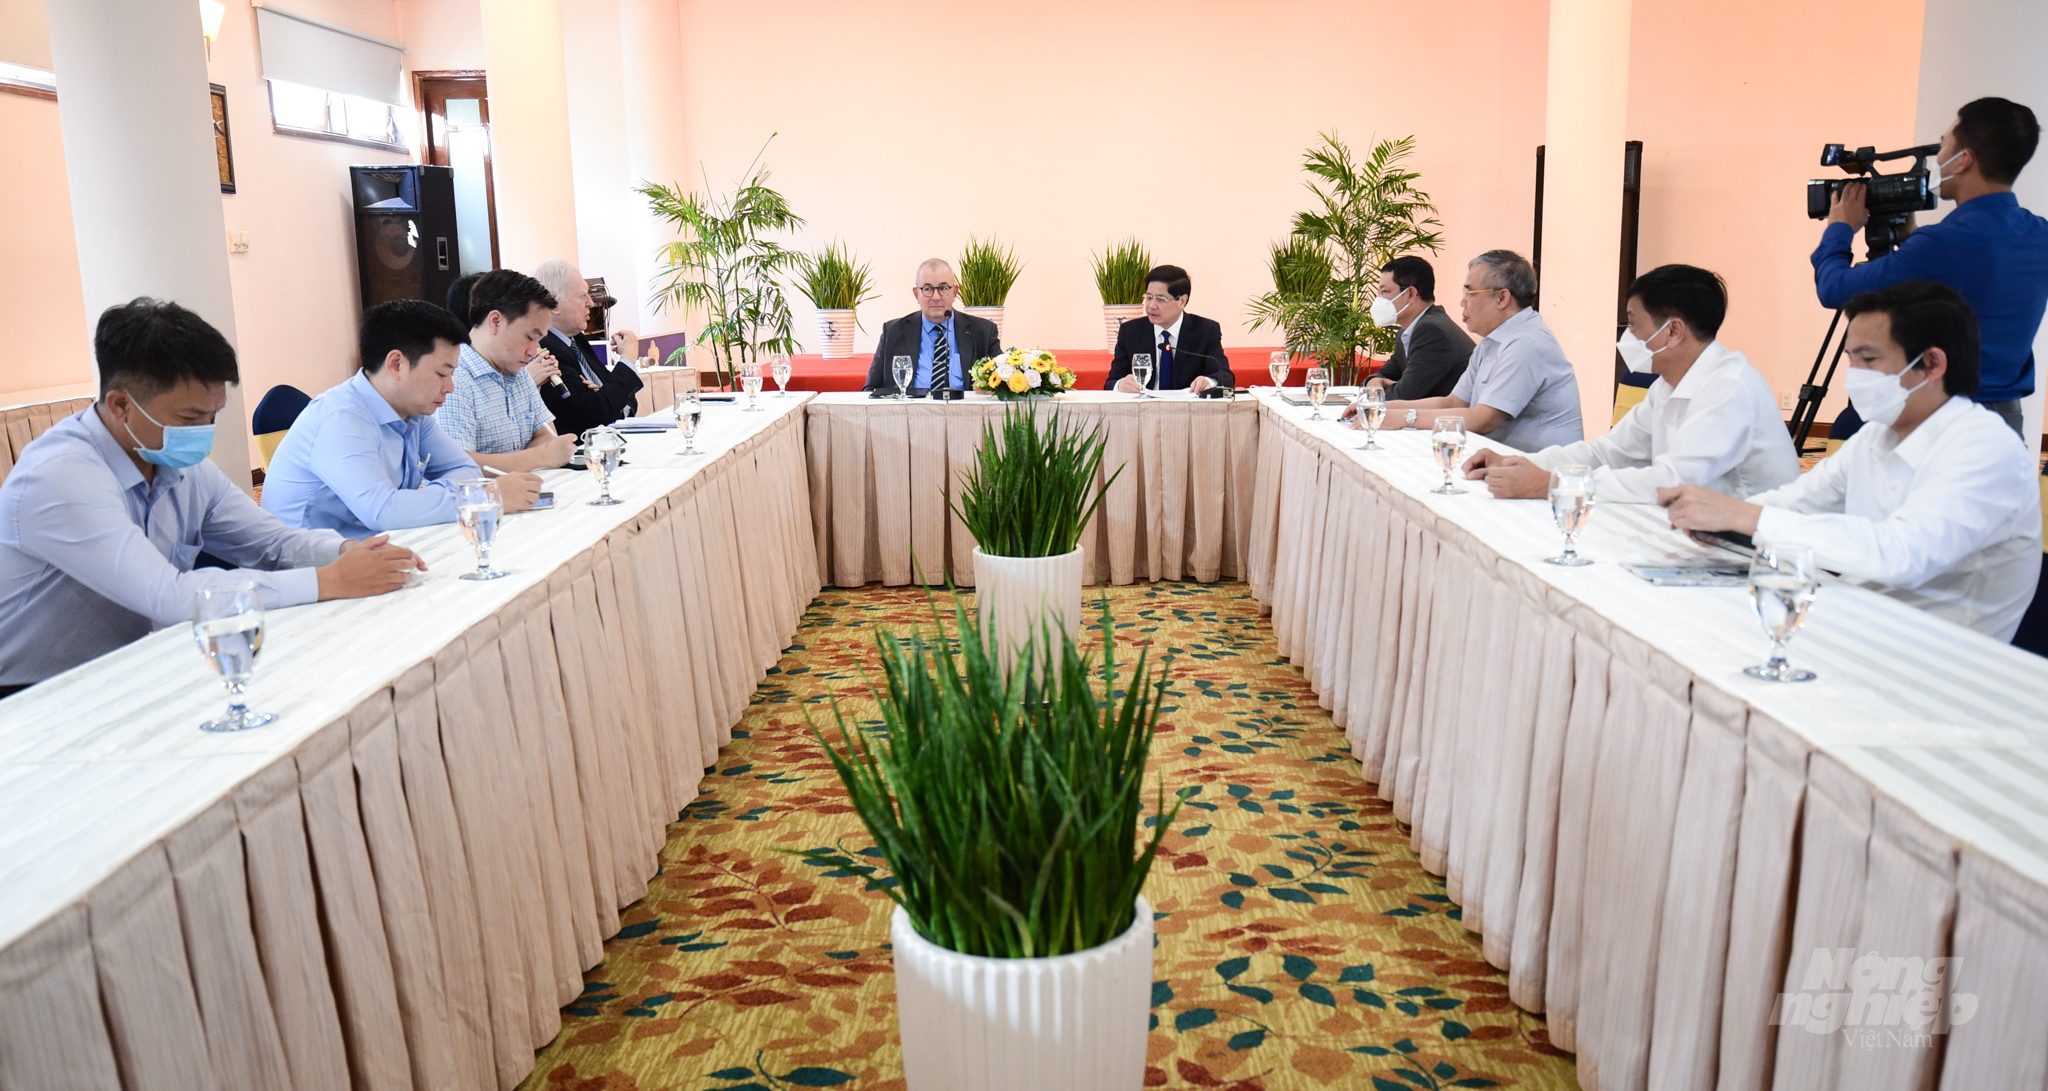 Ambassador Paul Jansen said that in the coming time, cooperation activities in the field of agriculture between the two countries will be enhanced. Photo: Tung Dinh.